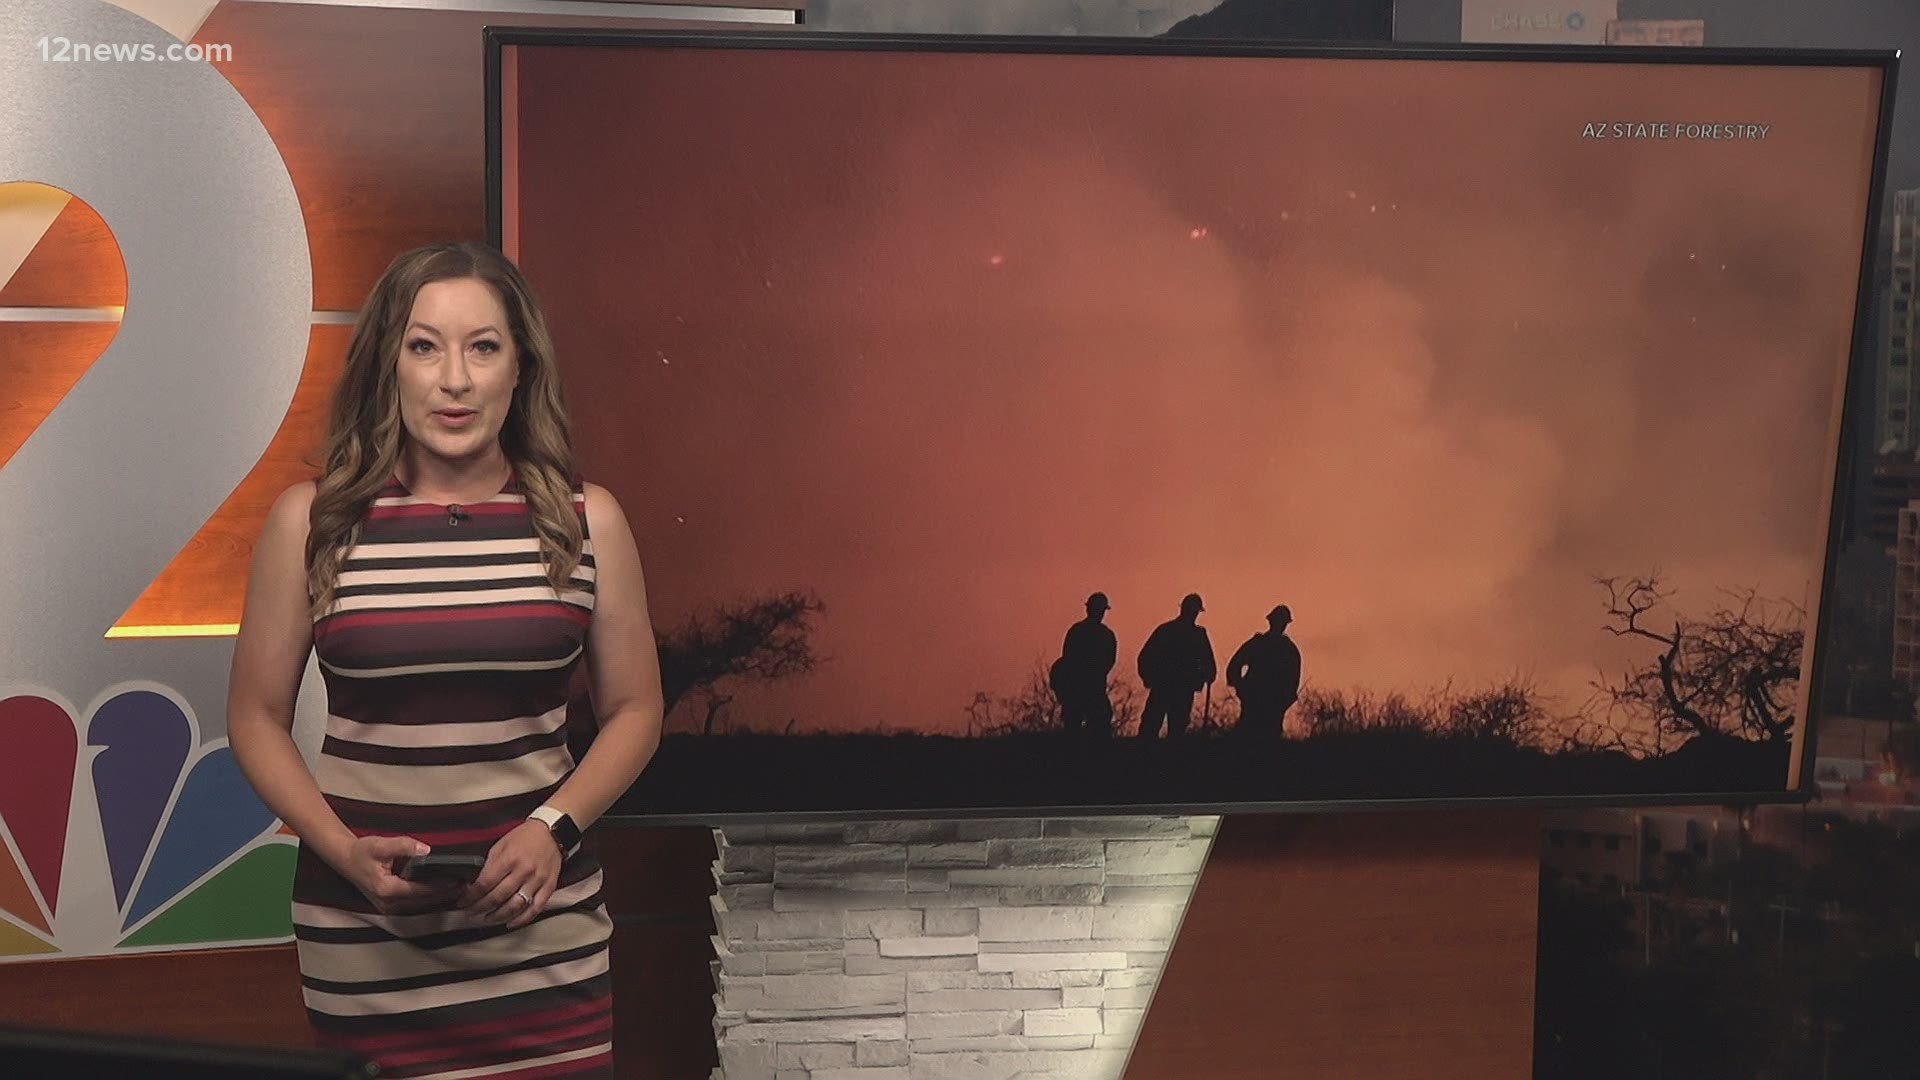 The Telegraph Fire burning near Superior is now the 9th largest wildfire in Arizona history. Jen Wahl has more on the firefighting efforts.